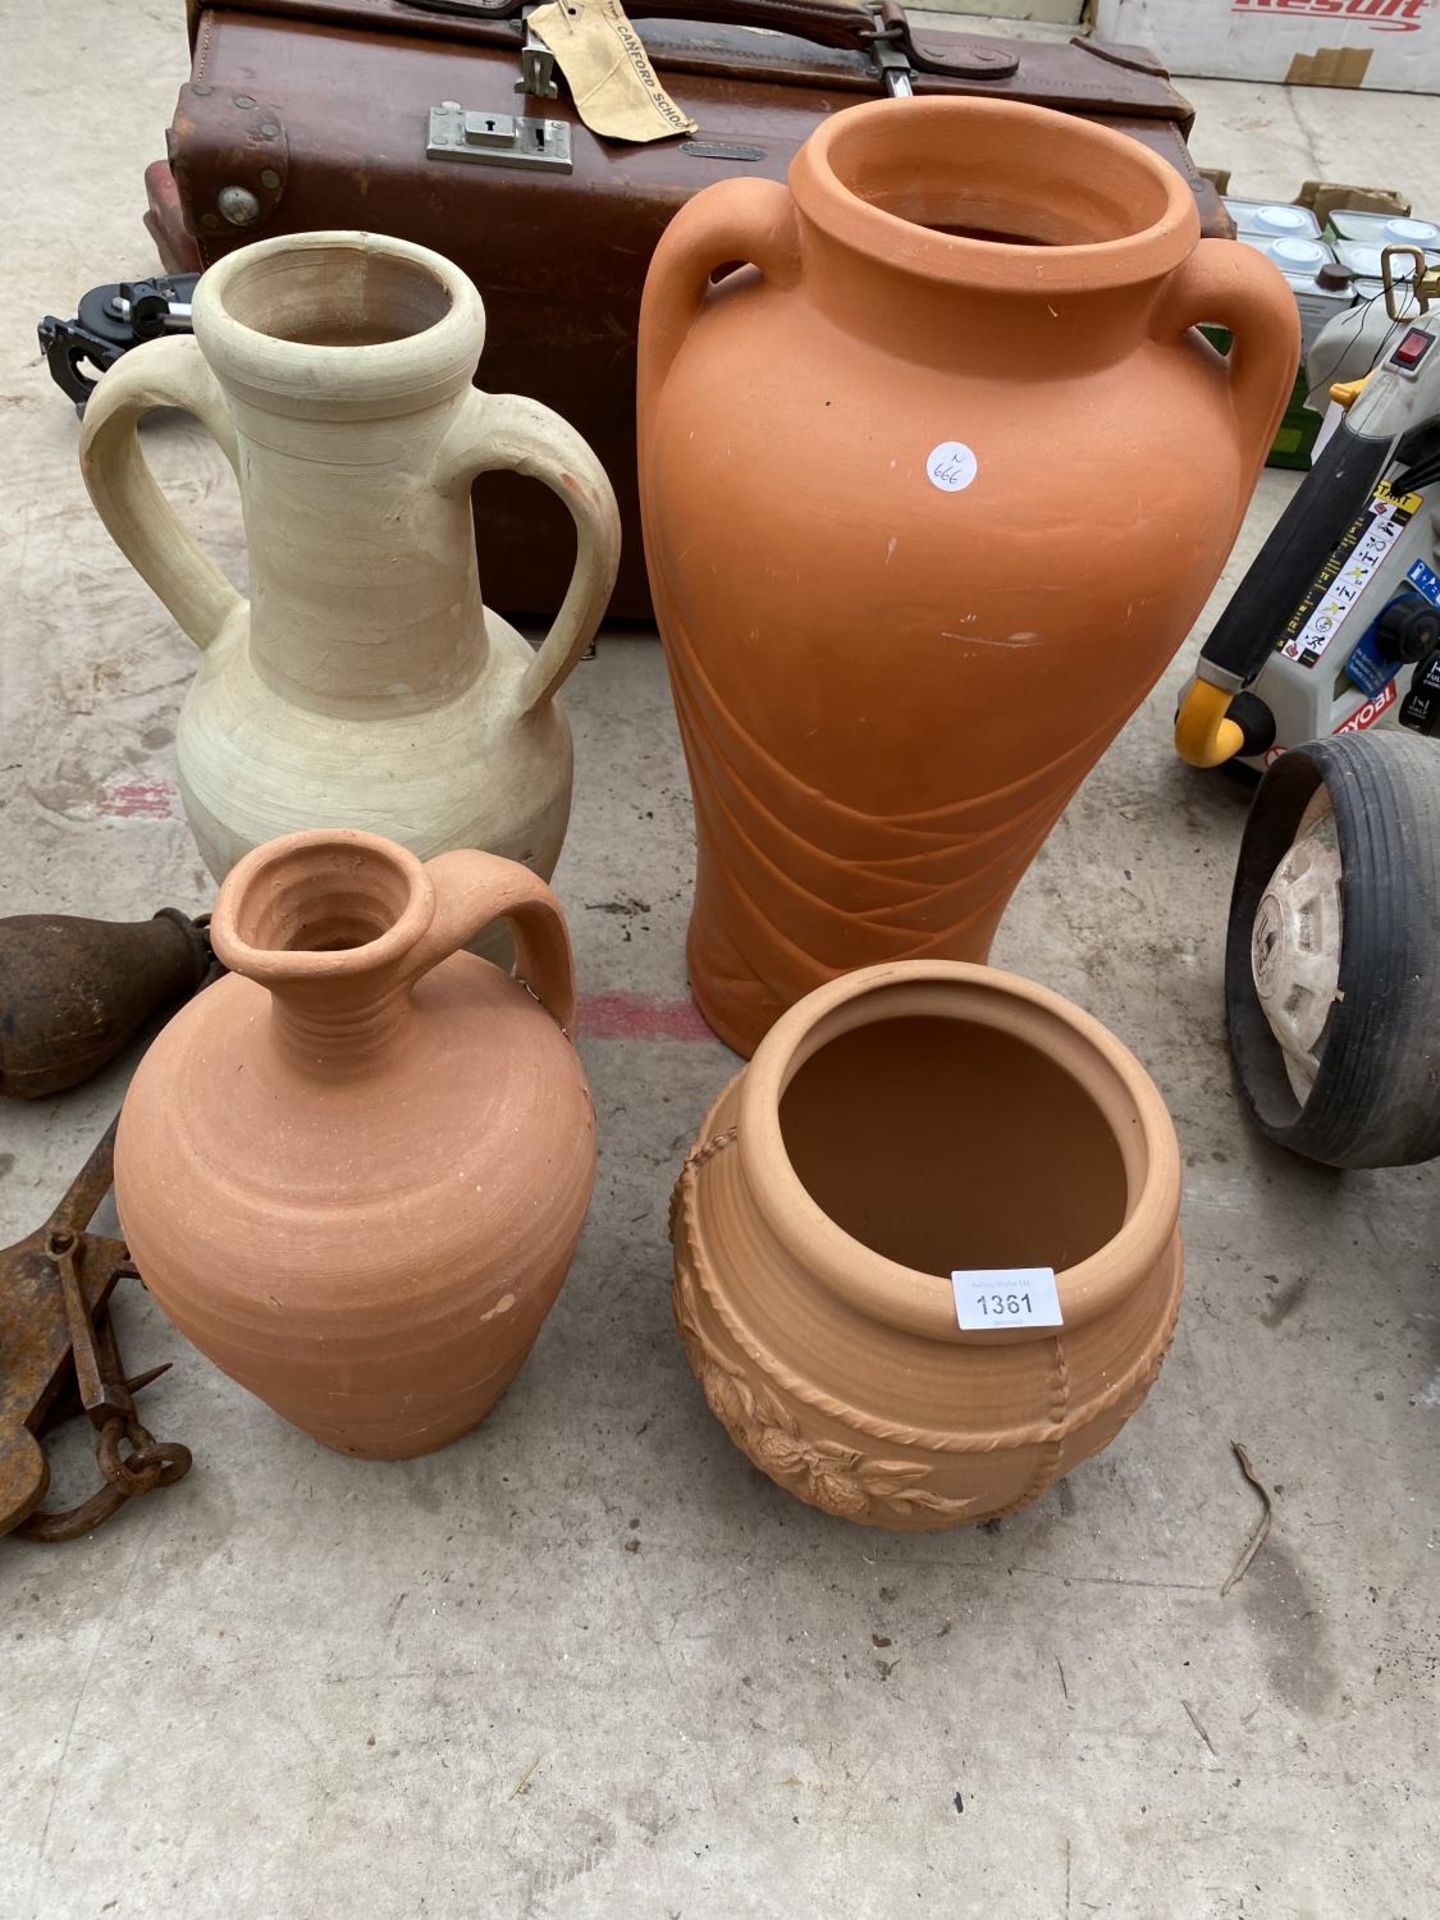 A TERRACOTTA PLANTER, A TERRACOTTA JUG AND TWO TERRACOTTA URNS